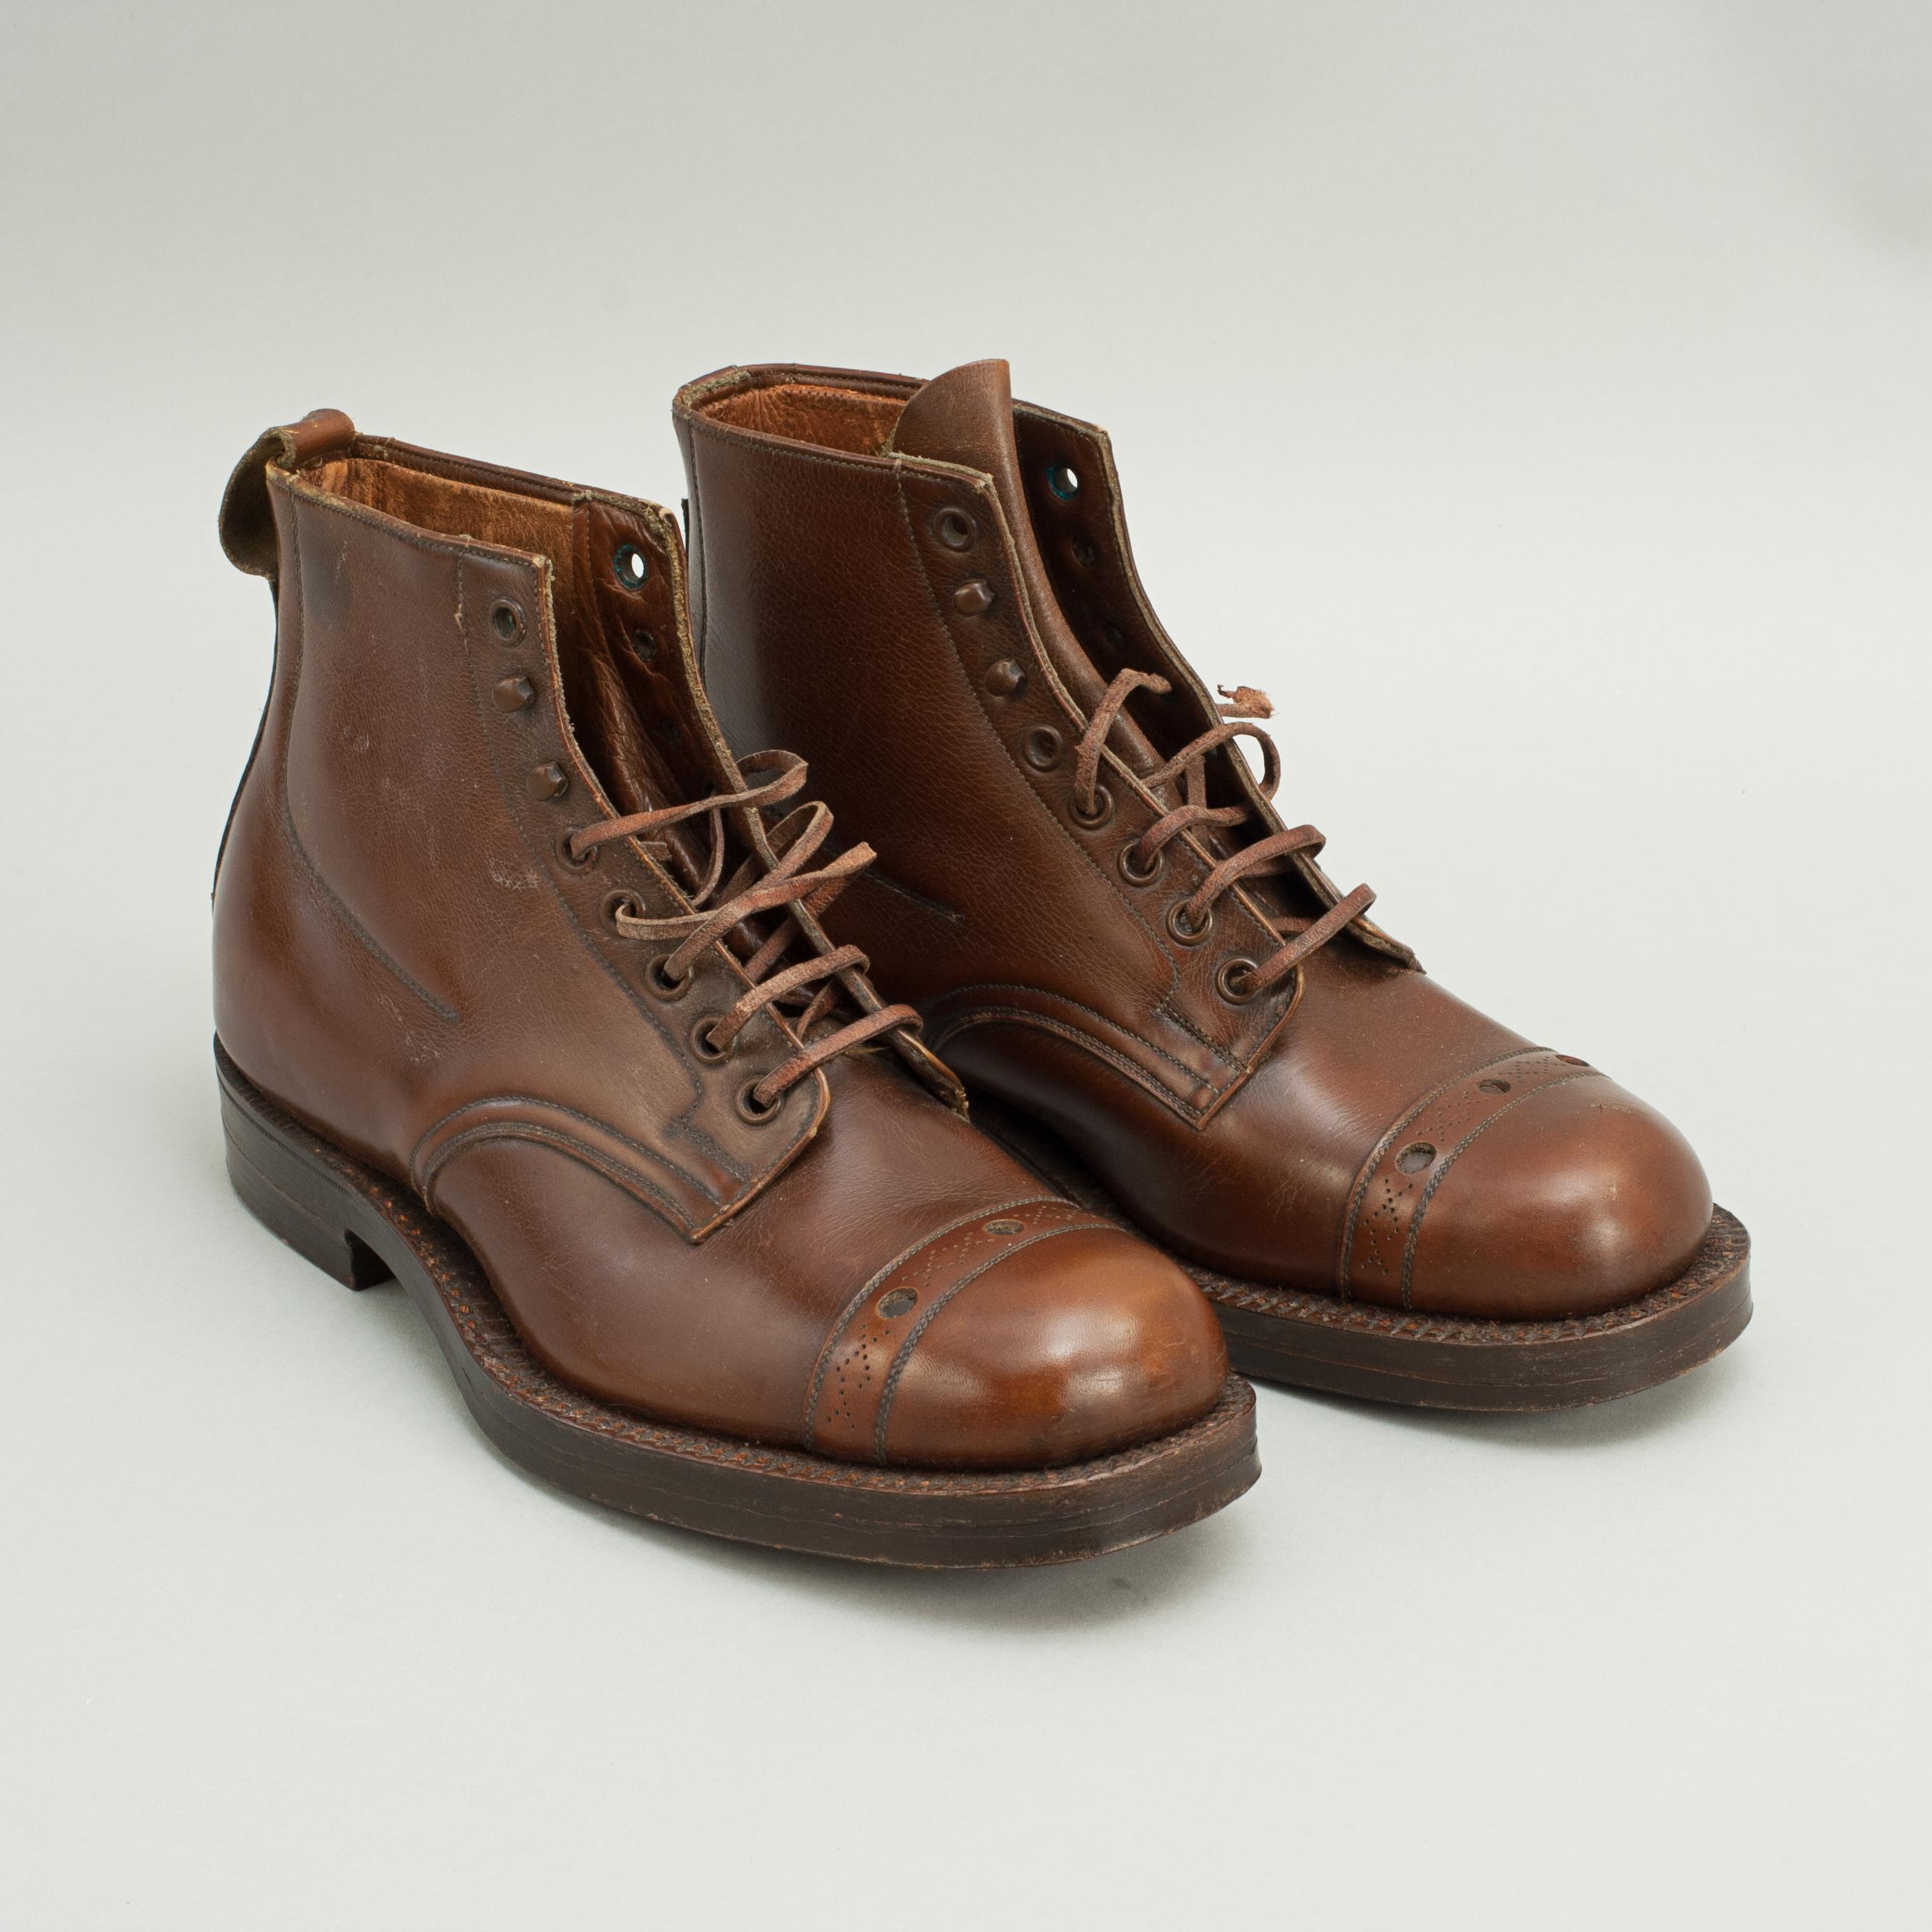 rrl bowery boots